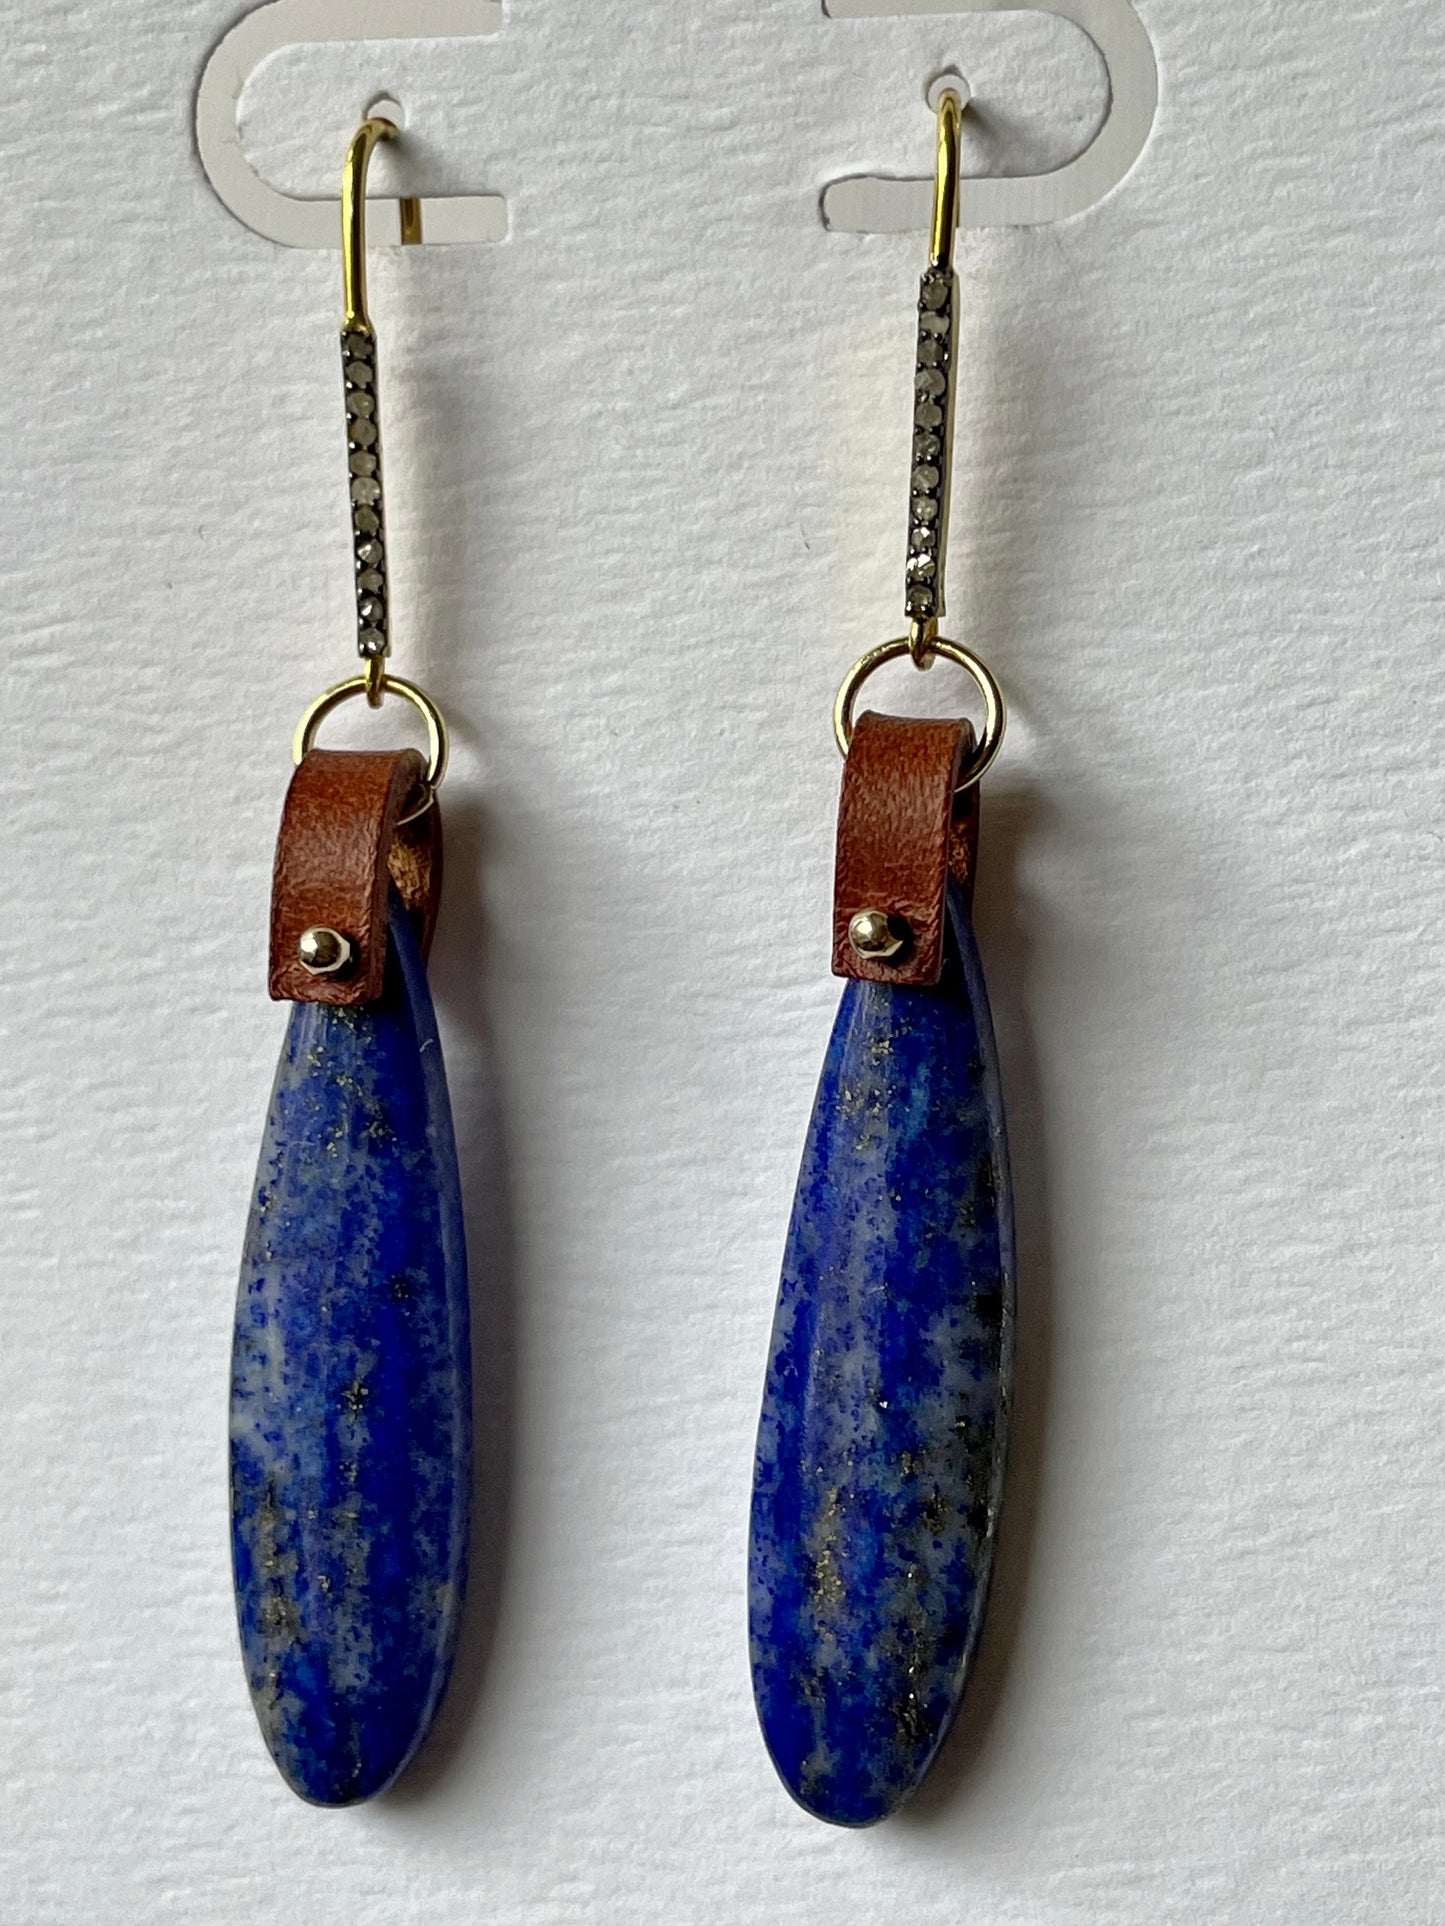 Lapis and gold vermeil with pave diamonds OOAK (one of a kind)drop earrings